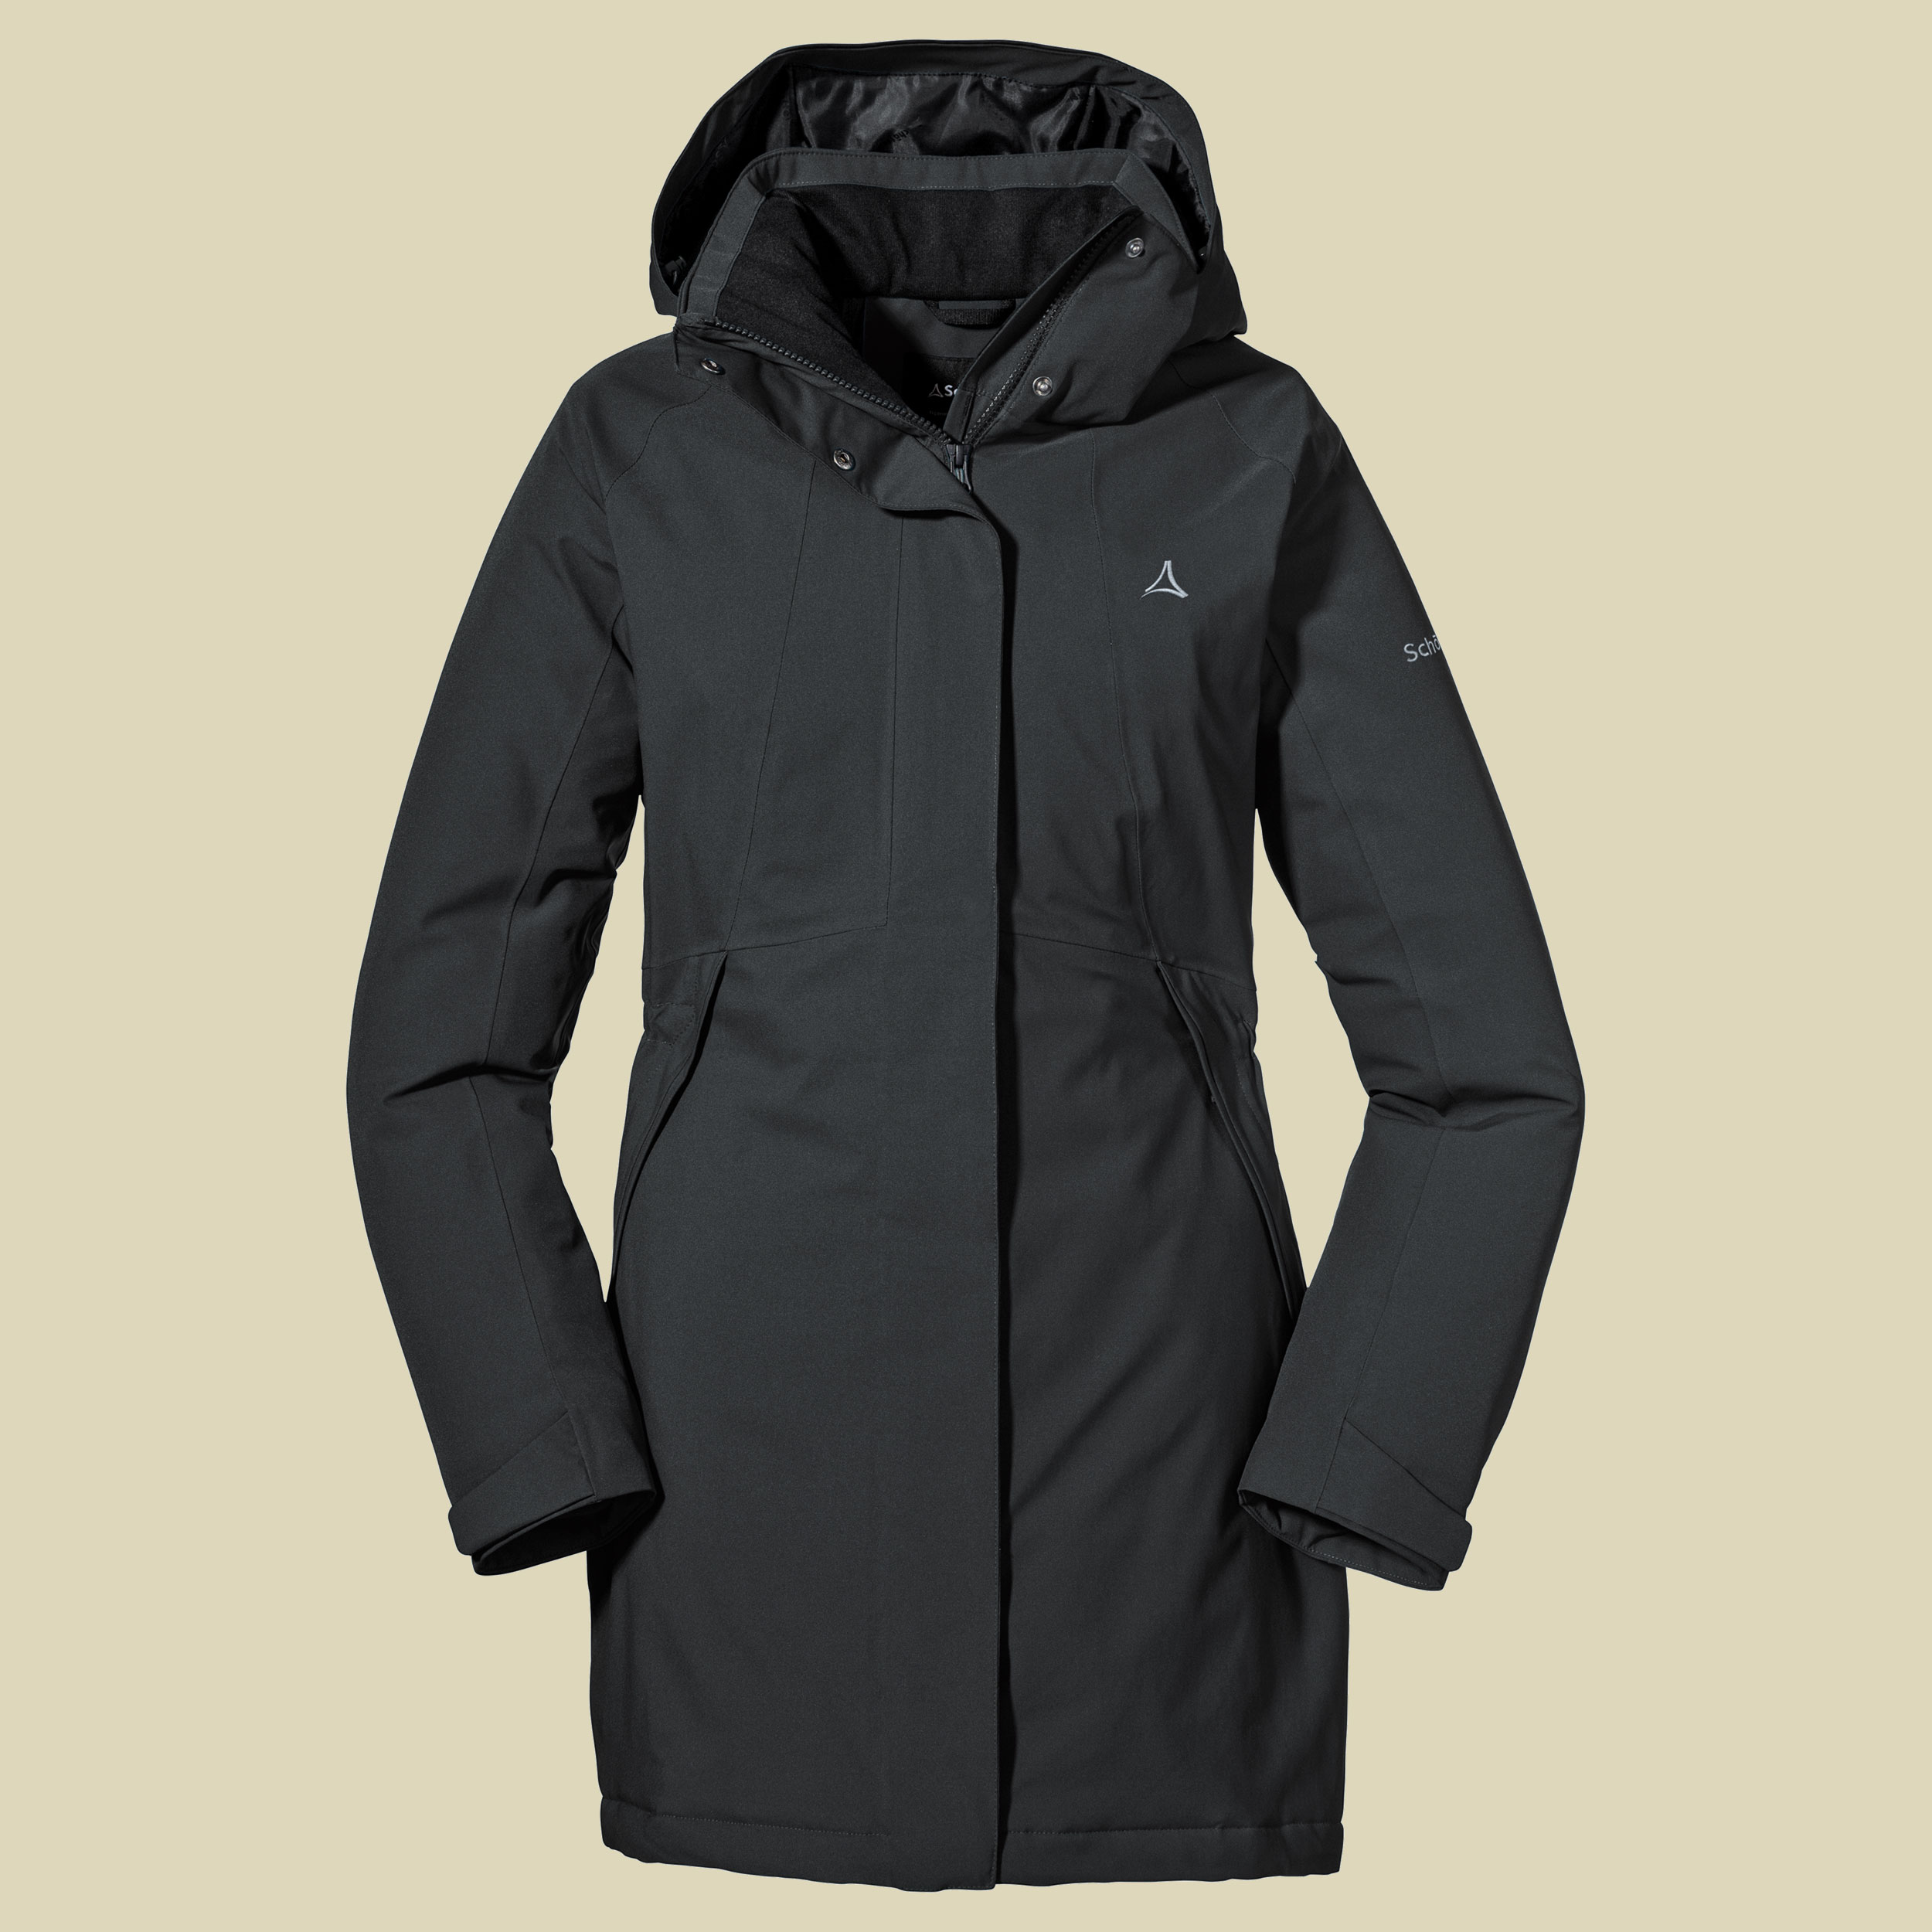 Insulated Jacket Bastianisee L Women Größe 46 Farbe black